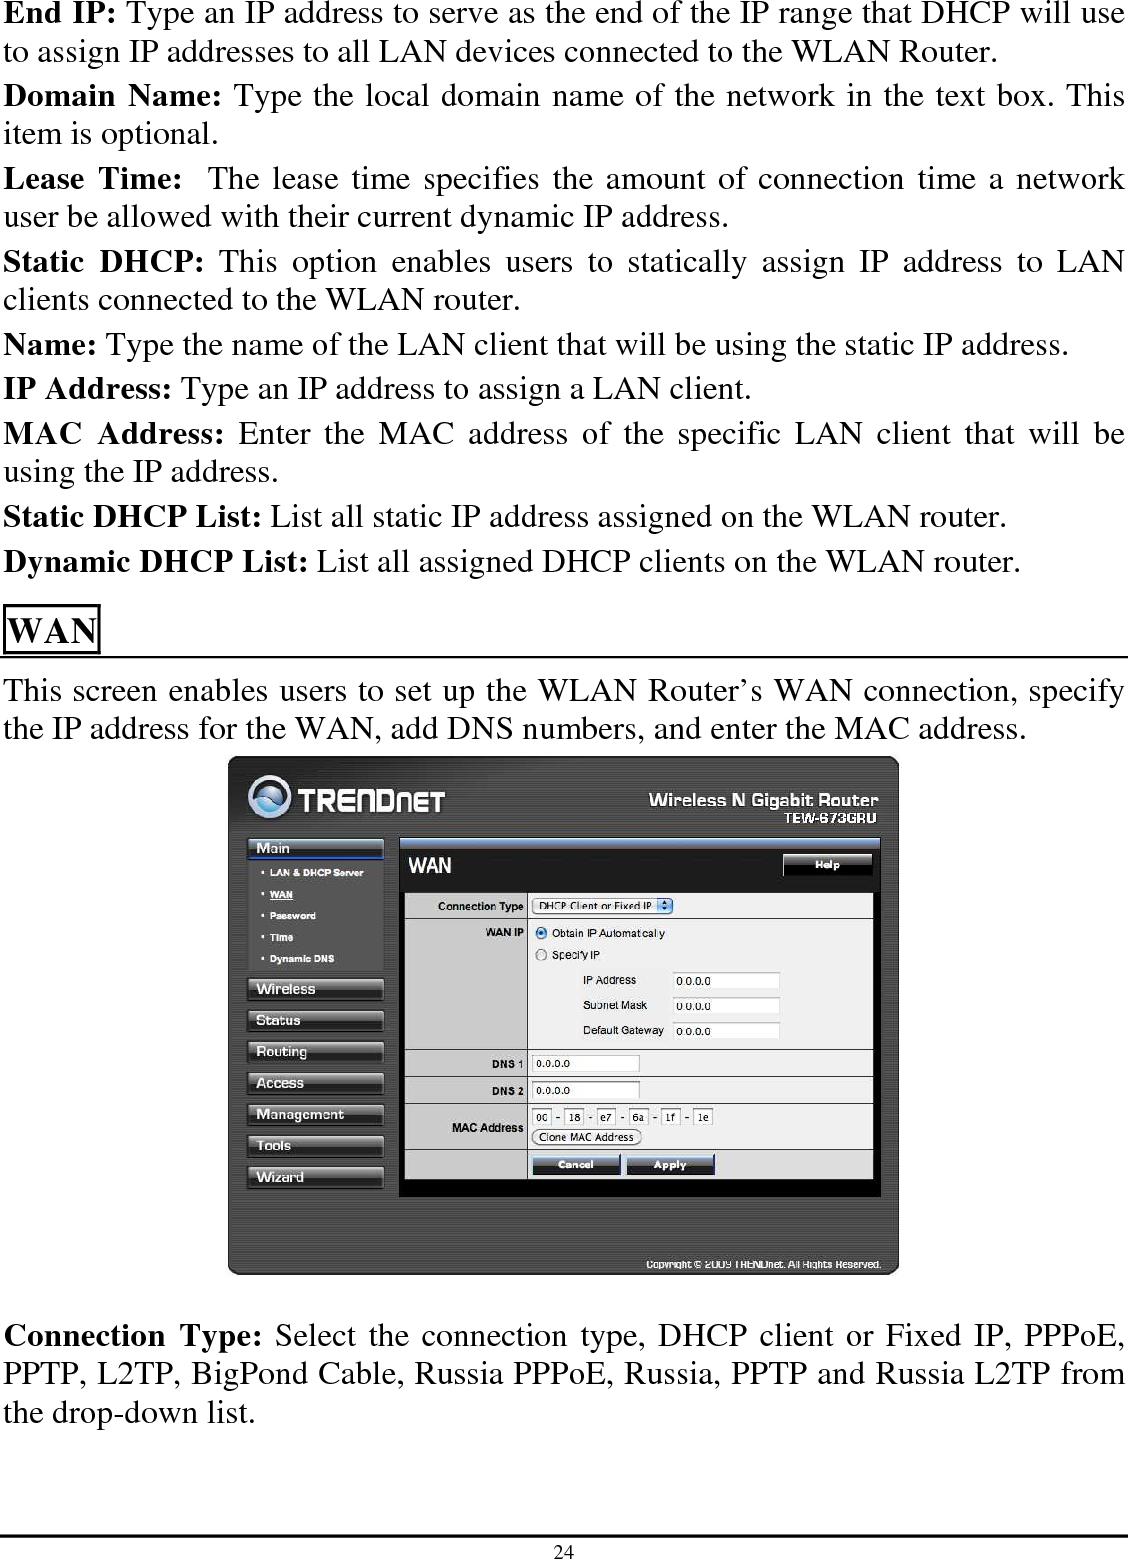 24 End IP: Type an IP address to serve as the end of the IP range that DHCP will use to assign IP addresses to all LAN devices connected to the WLAN Router. Domain Name: Type the local domain name of the network in the text box. This item is optional. Lease Time:  The lease time specifies the amount of connection time a network user be allowed with their current dynamic IP address. Static  DHCP:  This  option  enables  users  to  statically  assign  IP  address  to  LAN clients connected to the WLAN router. Name: Type the name of the LAN client that will be using the static IP address. IP Address: Type an IP address to assign a LAN client. MAC  Address:  Enter  the  MAC  address  of  the  specific  LAN  client  that  will  be using the IP address. Static DHCP List: List all static IP address assigned on the WLAN router. Dynamic DHCP List: List all assigned DHCP clients on the WLAN router. WAN This screen enables users to set up the WLAN Router’s WAN connection, specify the IP address for the WAN, add DNS numbers, and enter the MAC address.   Connection Type: Select the connection type, DHCP client or Fixed IP, PPPoE, PPTP, L2TP, BigPond Cable, Russia PPPoE, Russia, PPTP and Russia L2TP from the drop-down list. 